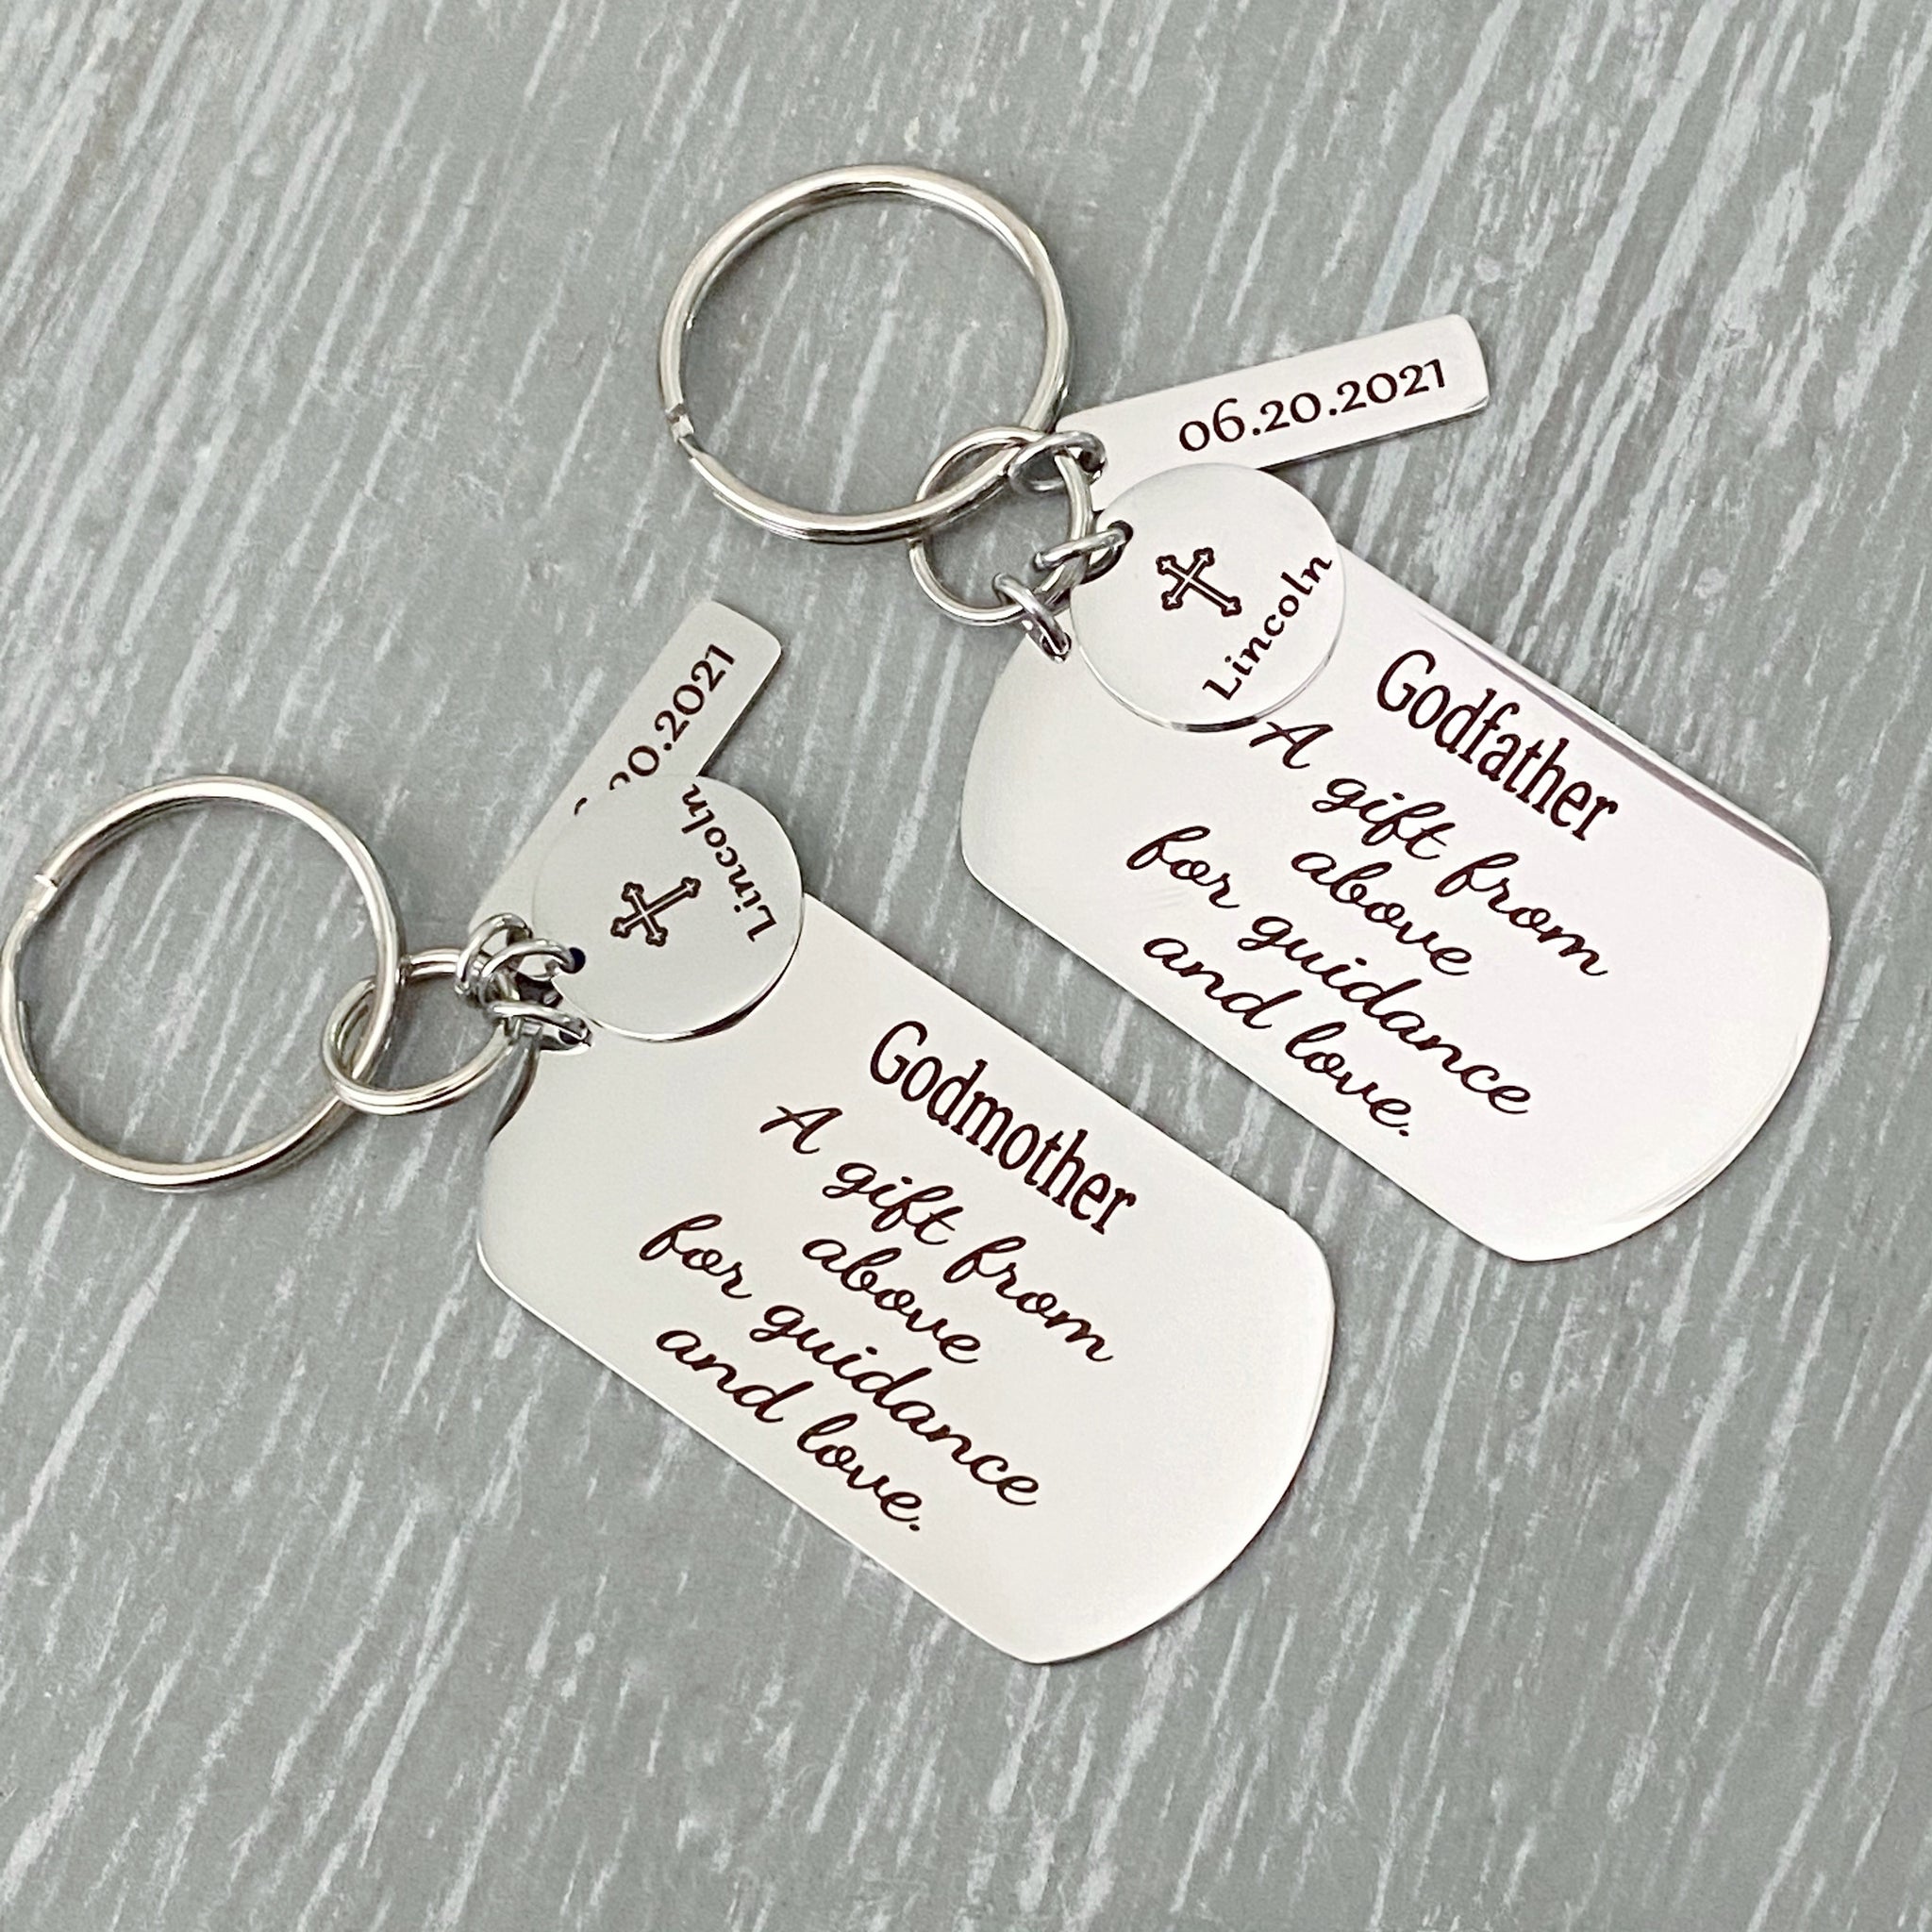 Personalized Photo Keychain, Custom Picture Key Chains, Customized Couples  Keyring, Keepsake Photo Key Ring, Valentines Gift for Her Him